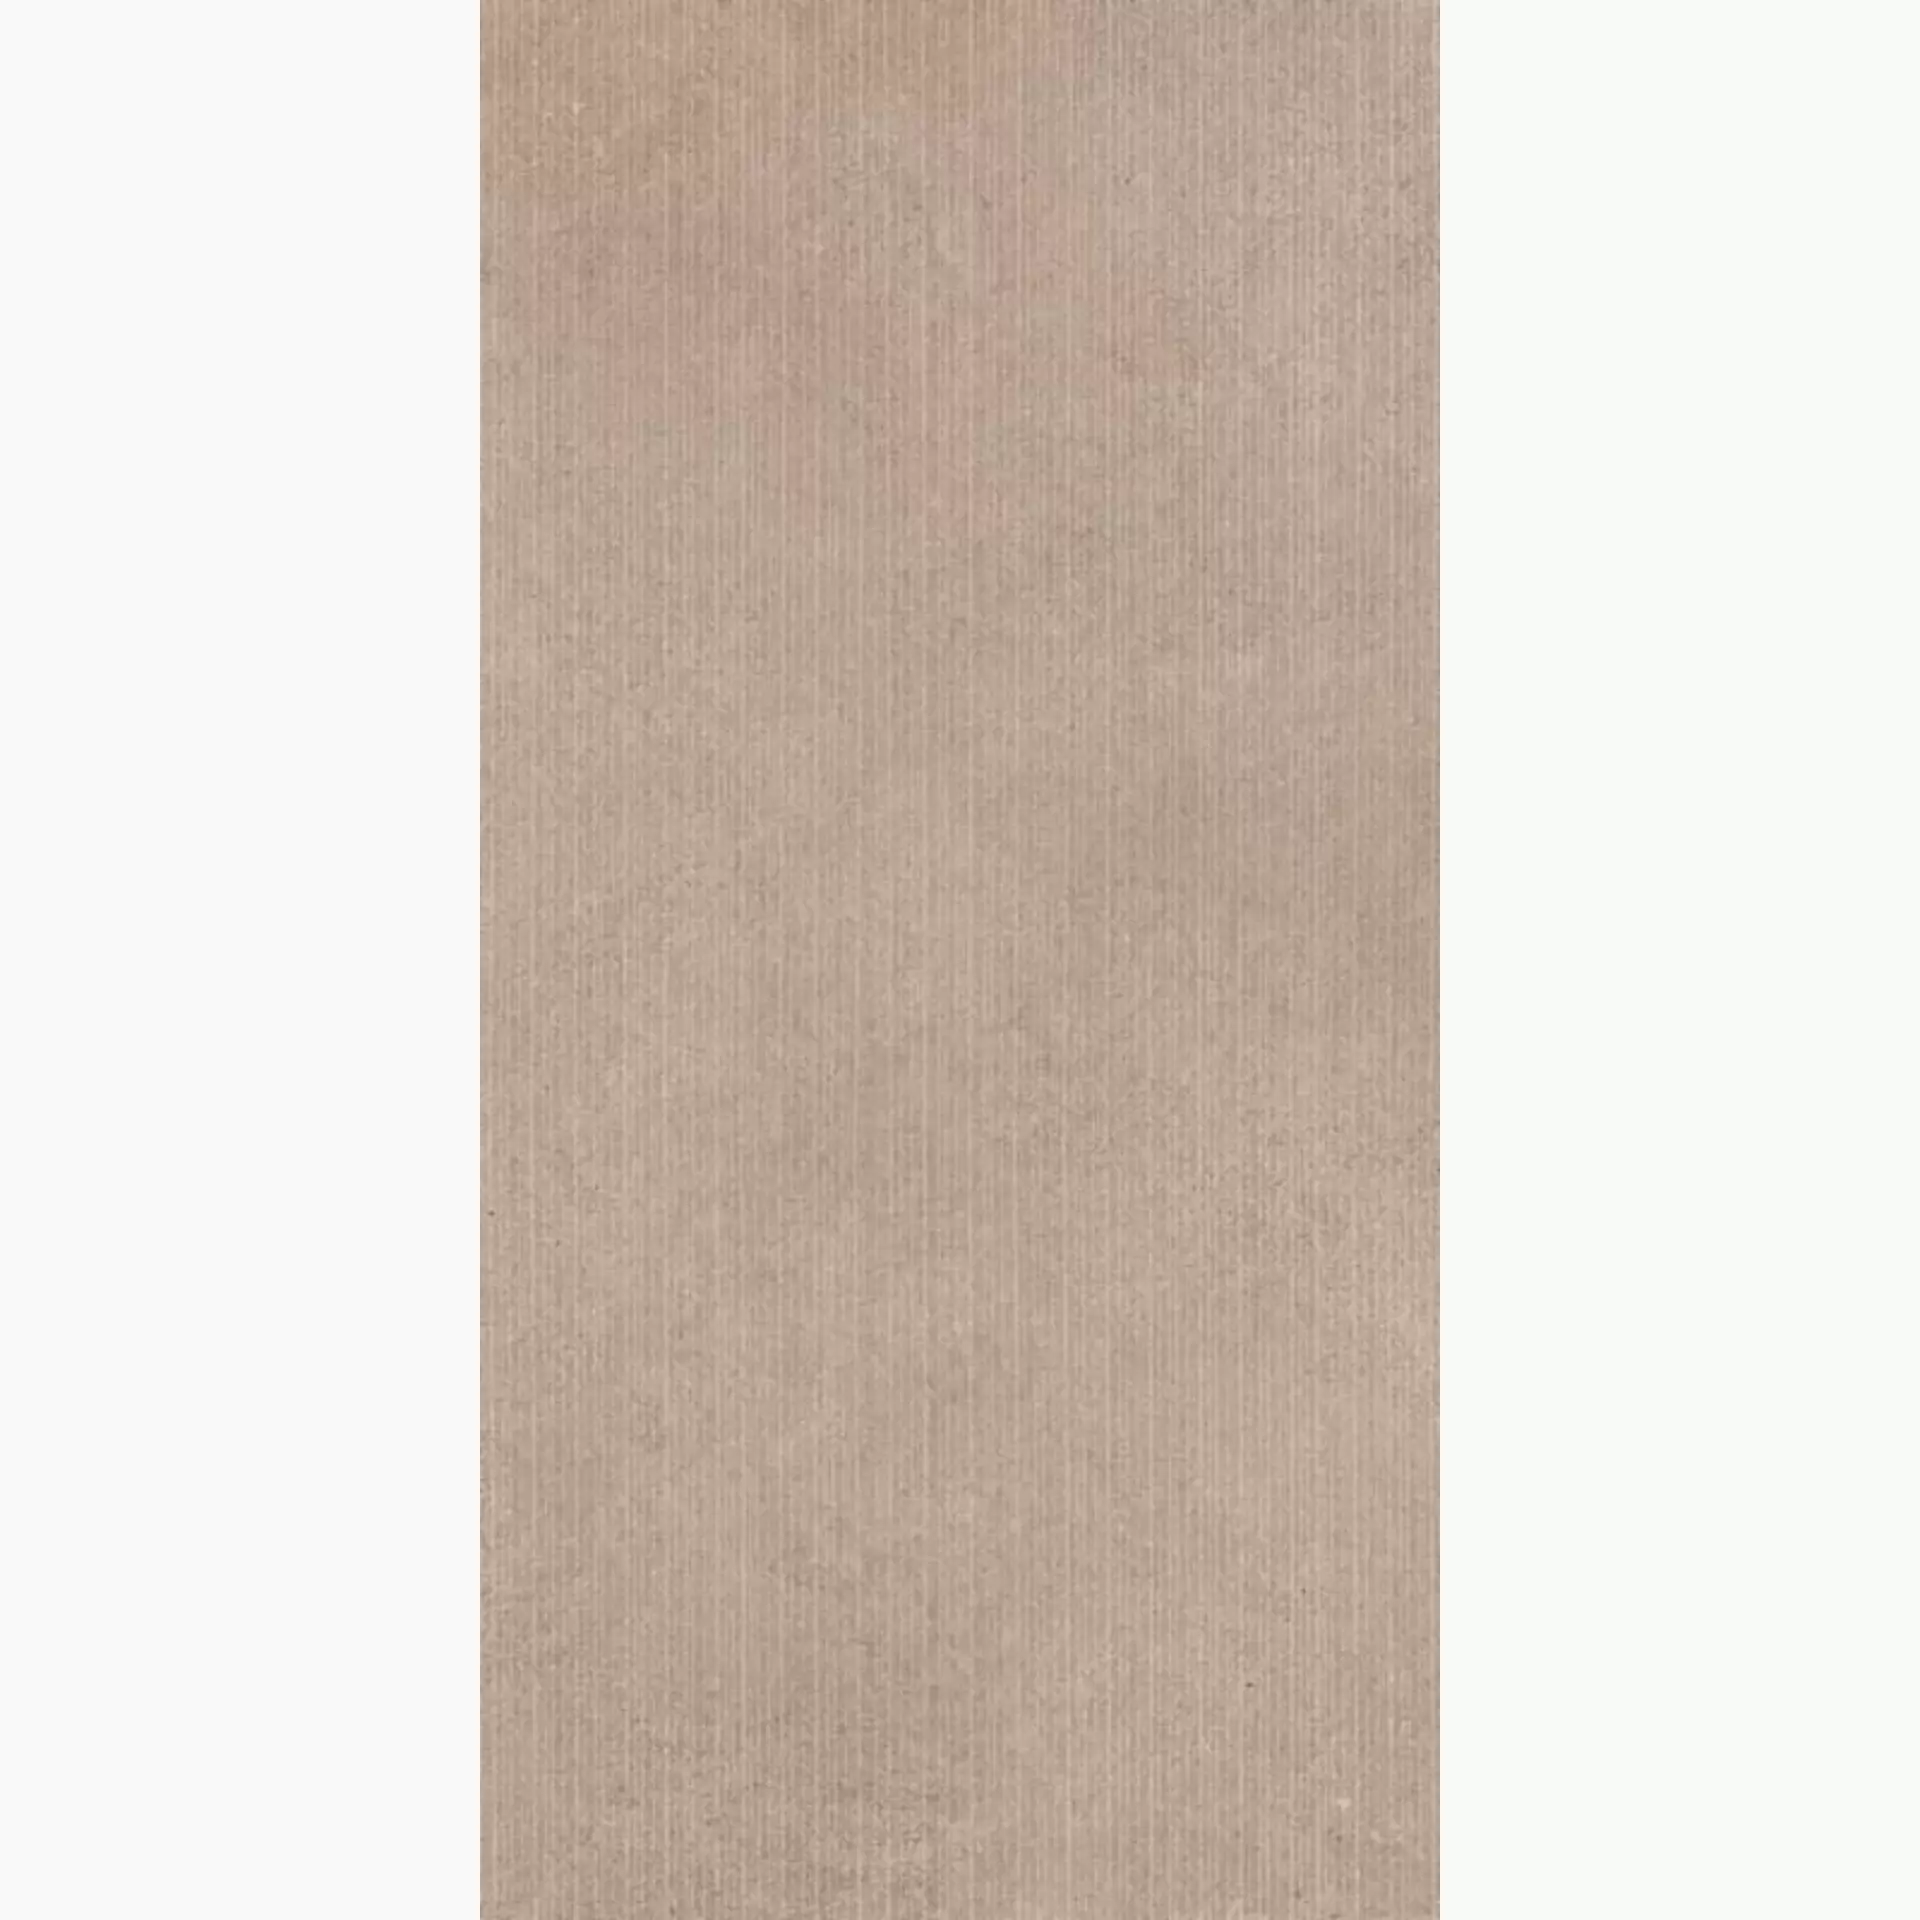 Sant Agostino Silkystone Taupe Rigato CSASKSRT60 60x120cm rectified 10mm